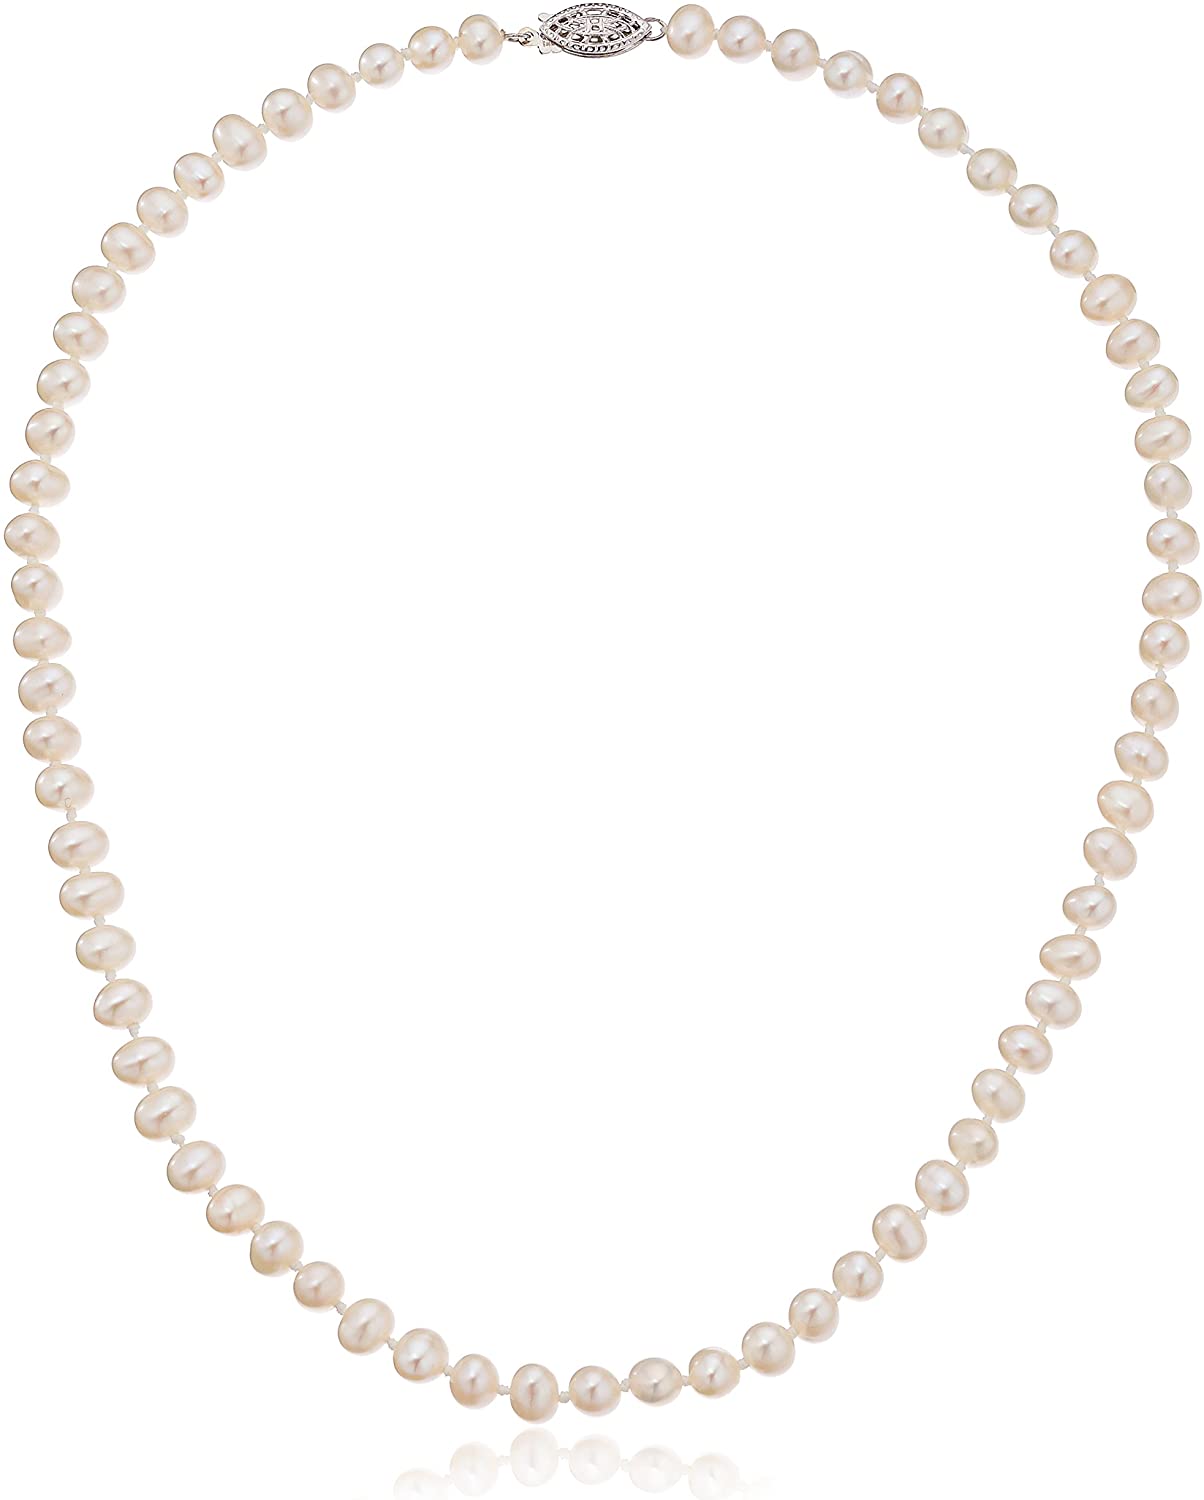 GSI Sterling Silver White A-Grade Freshwater Cultured-Pearl Necklace